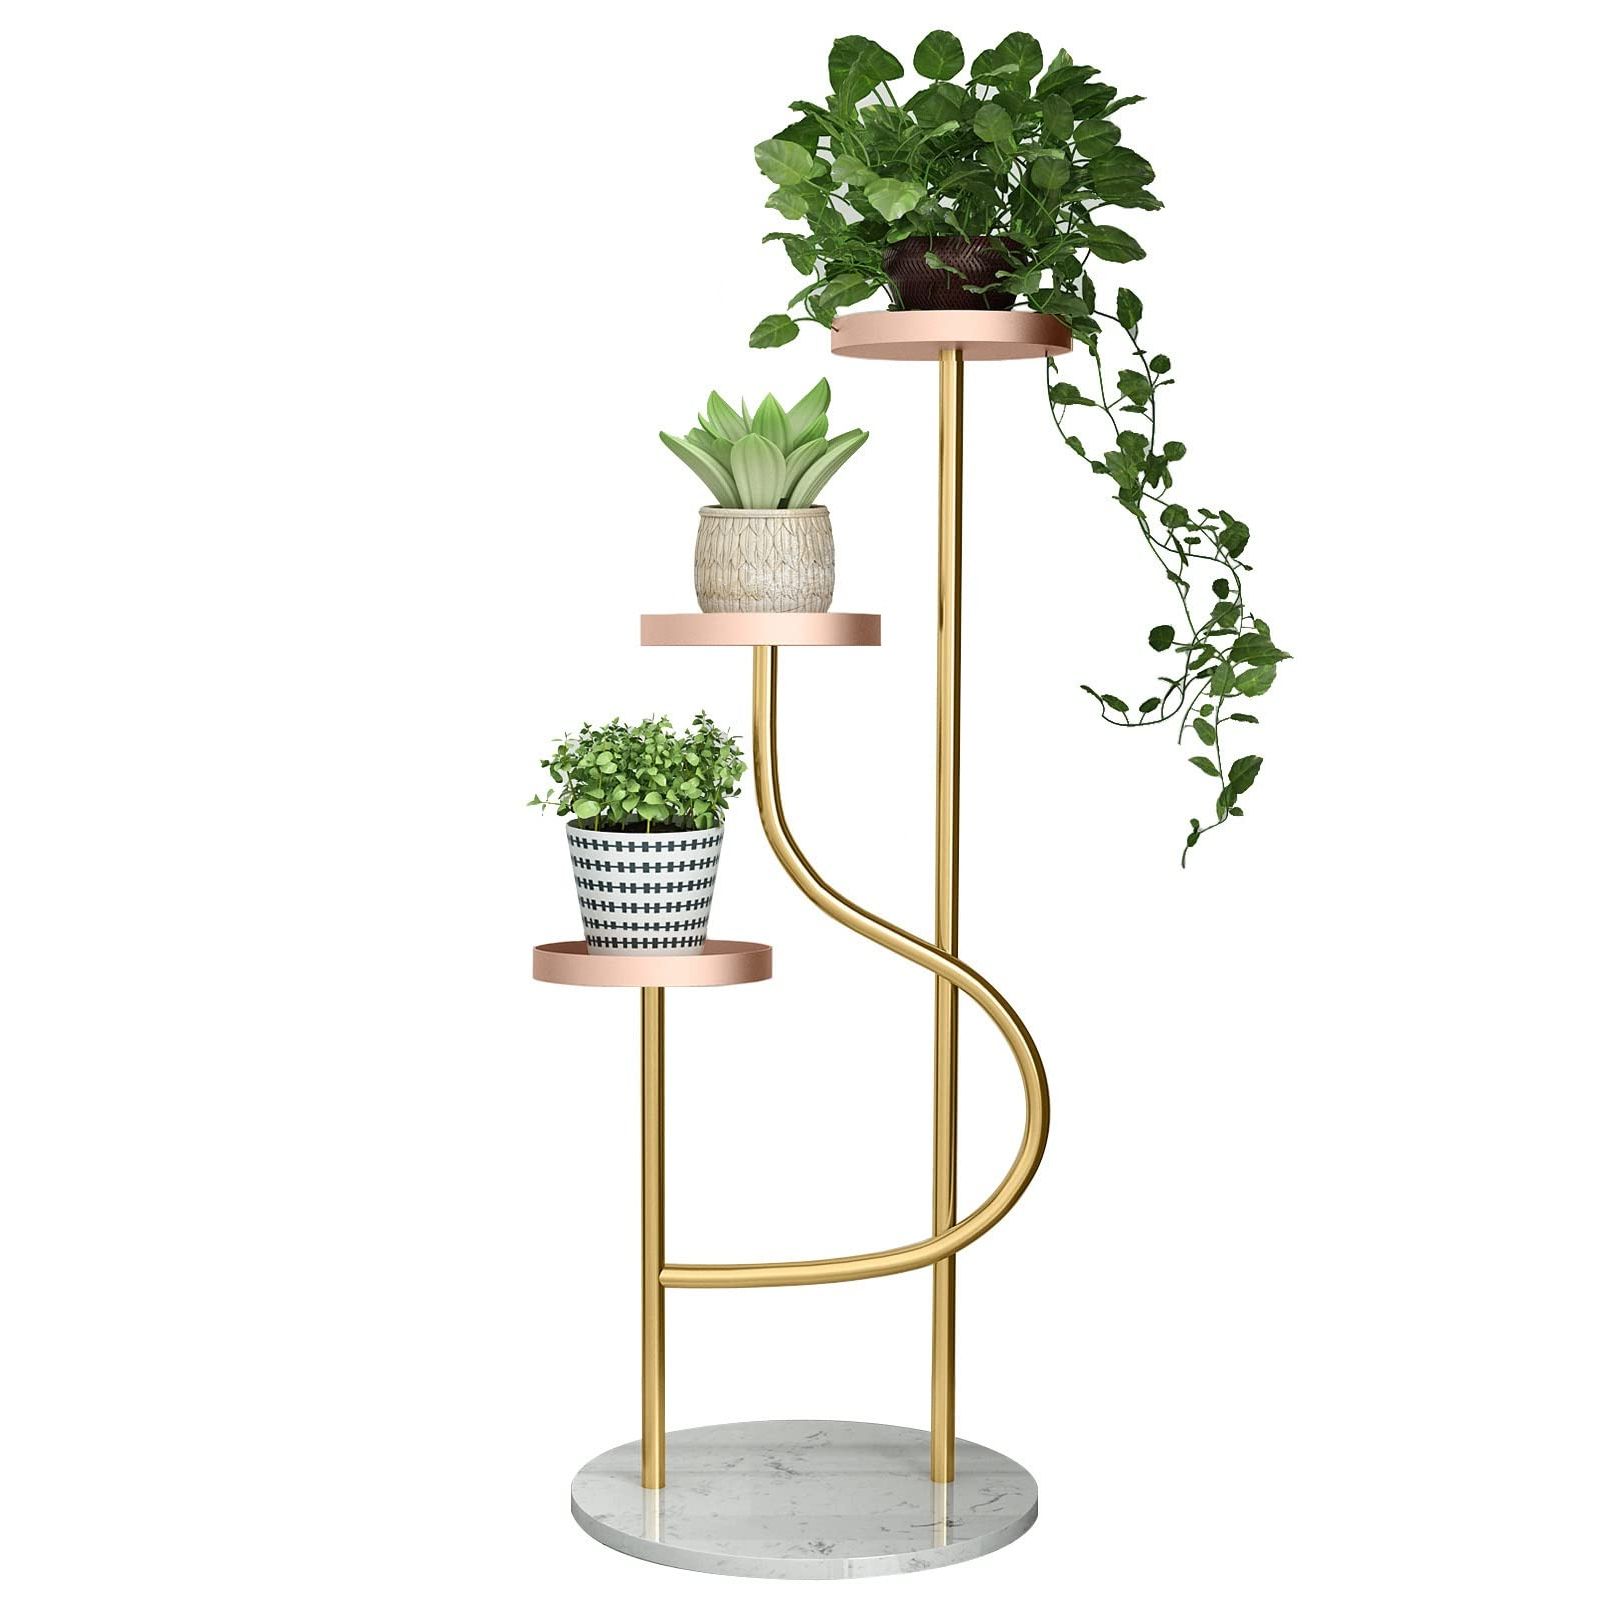 Amazon : Plant Stand 3 Tier Iron Plant Stand With Marble Base, 100cm  Tall European Style Flower Pot Display Shelf, Indoor Floor Standing Planter  Unit Organzier (color : Pink) : Patio, Lawn & Garden Intended For Current Iron Base Plant Stands (View 6 of 10)